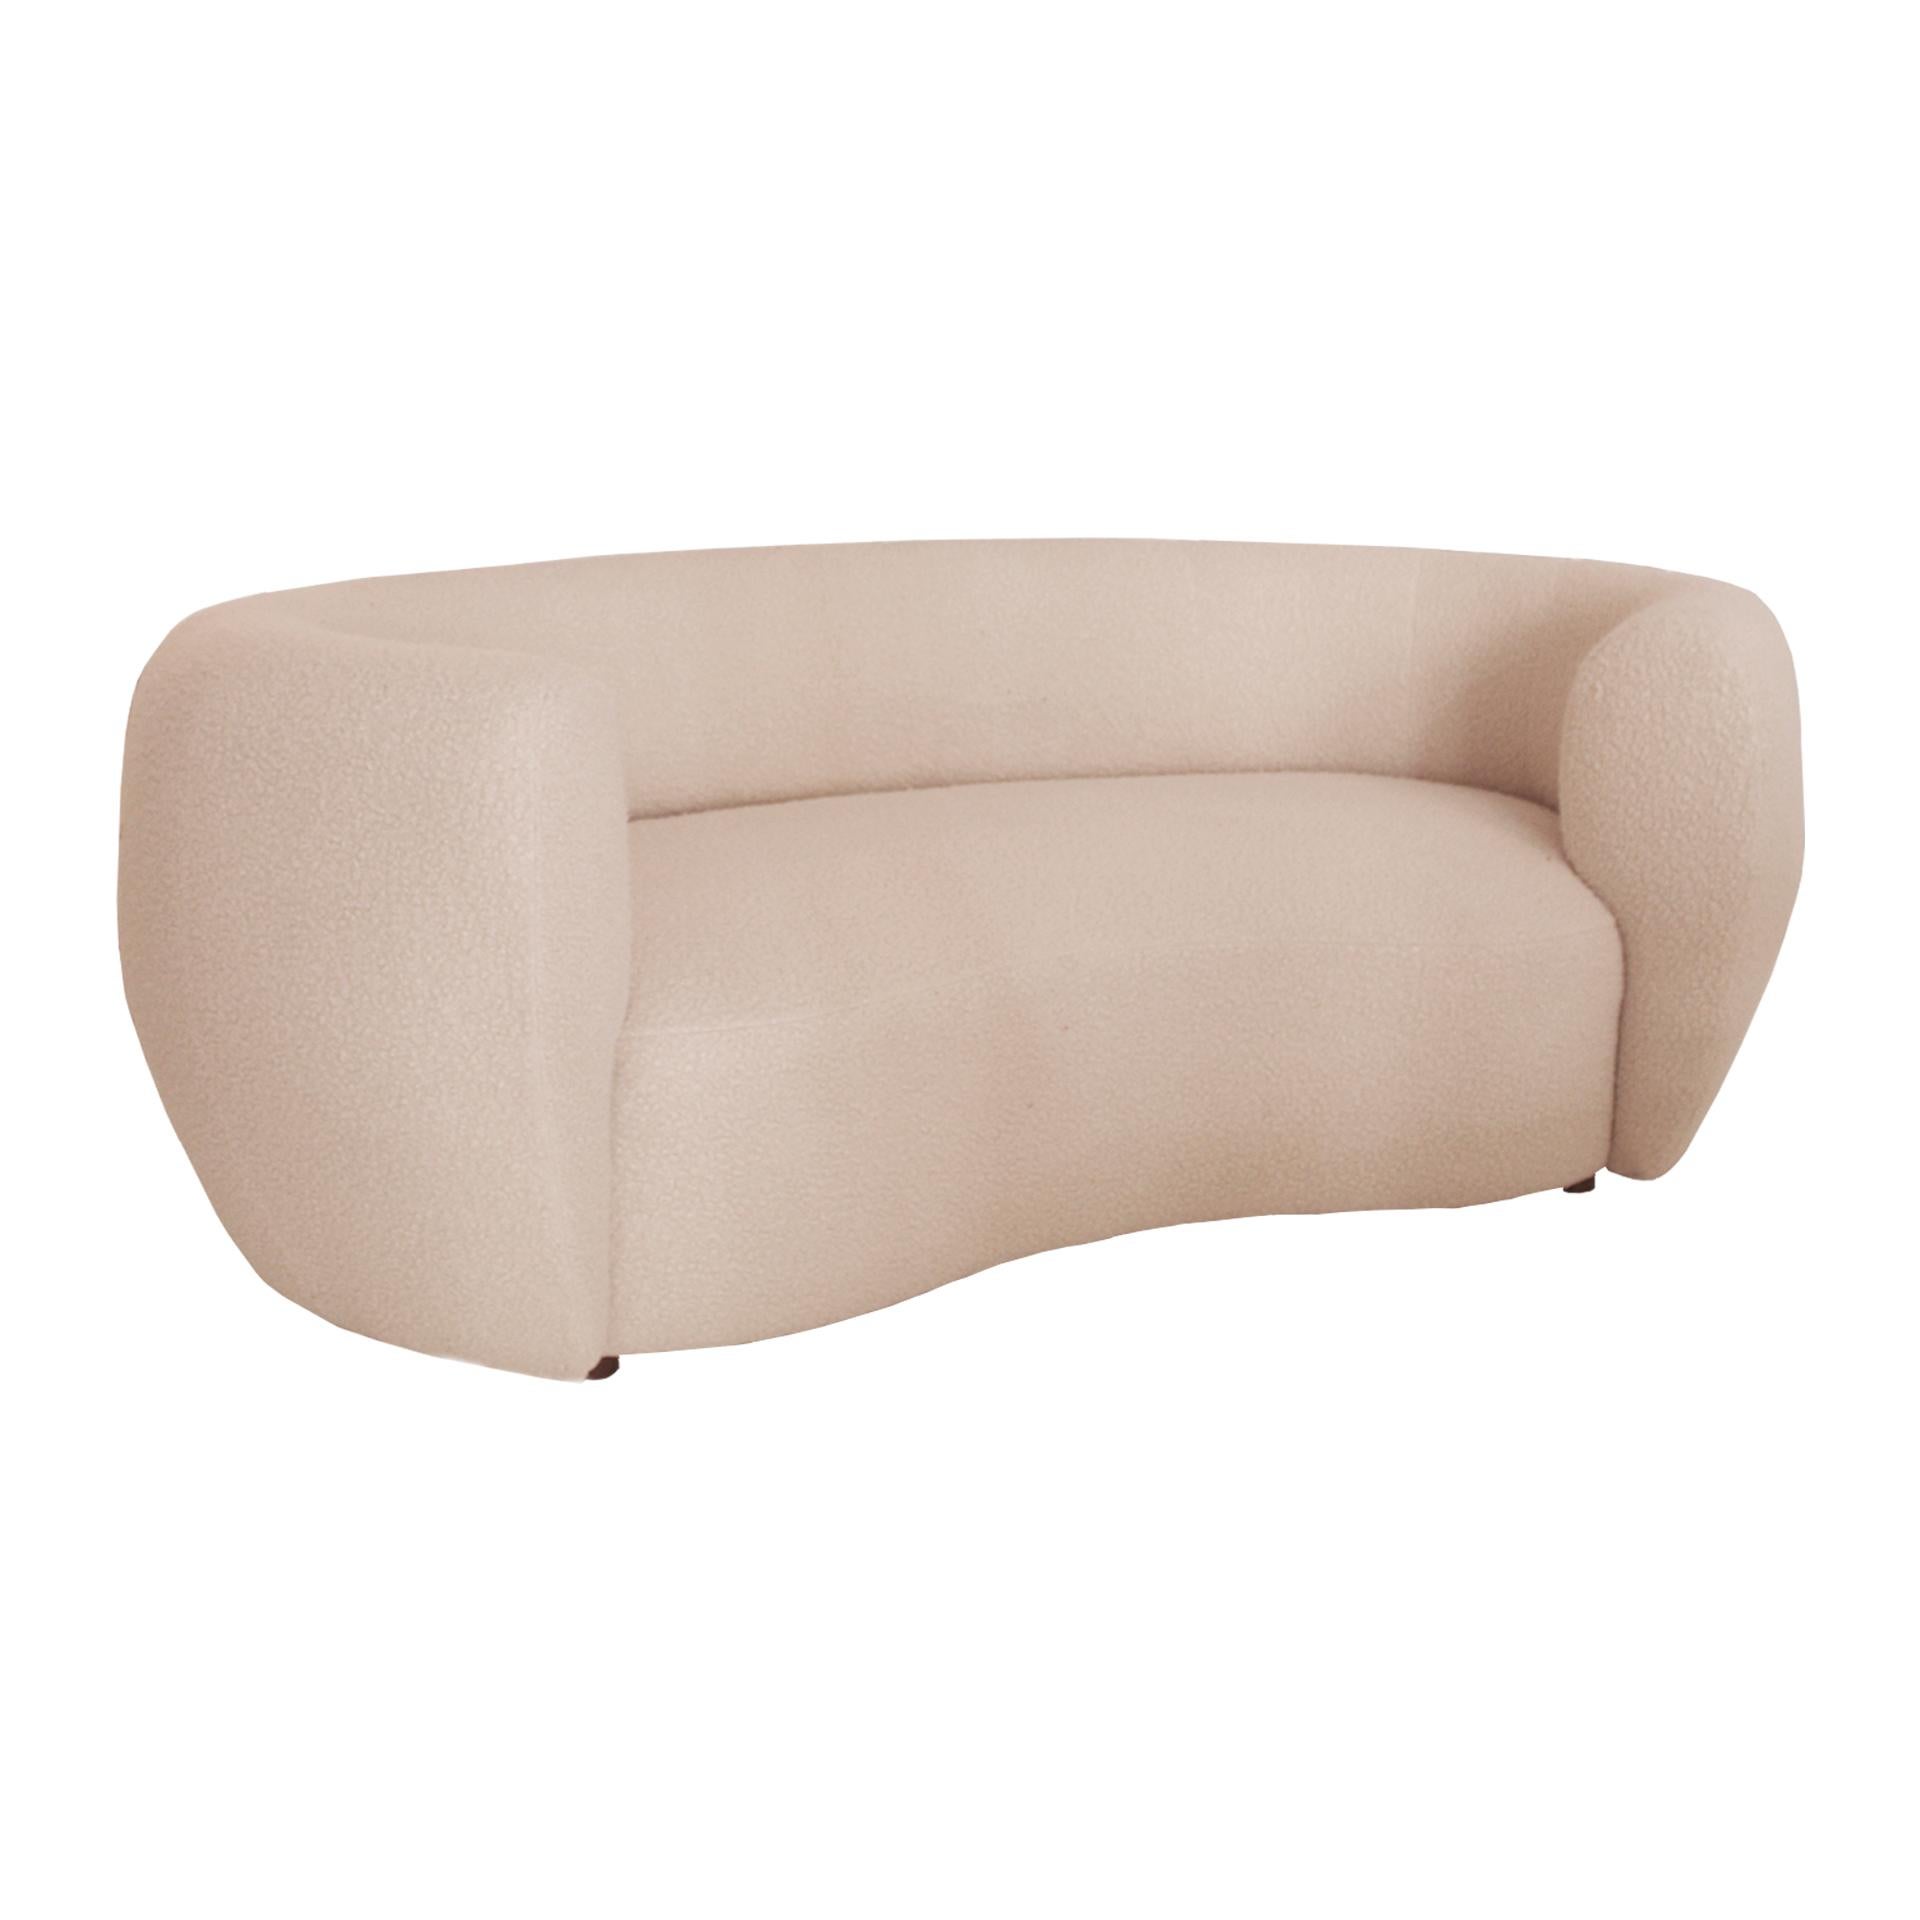 Curved sofa with structure and legs made of solid wood and reupholstered in beige bouclé. Italy, late 20th century.

Our main target is customer satisfaction, so we include in the price for this item professional and custom made packing.


Every